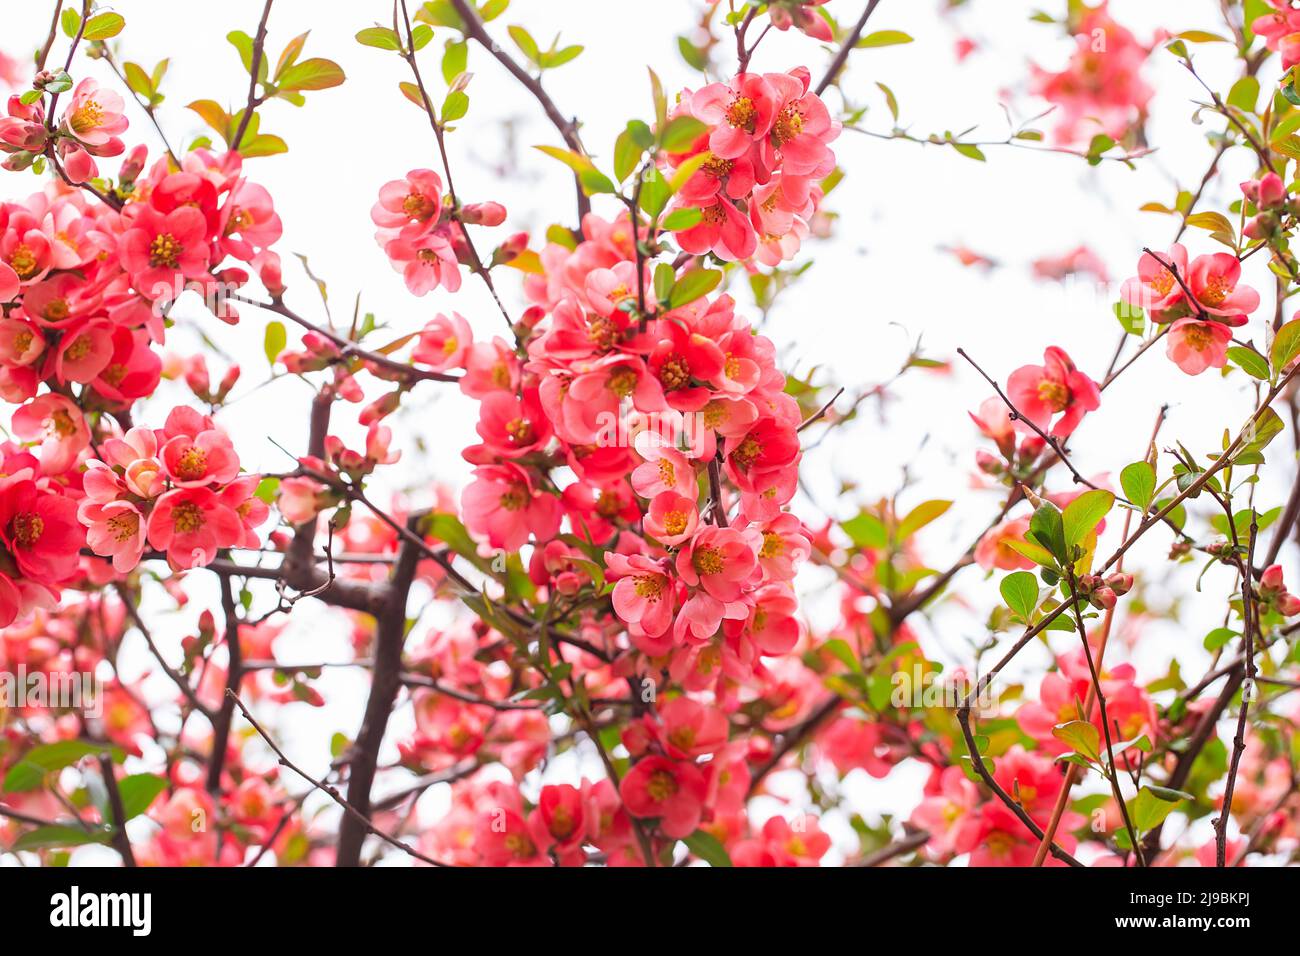 Bright red flowers of a Flowering quince, Chaenomeles speciosa, shrub. a thorny deciduous or semi-evergreen shrub also known as Japanese quince or Chi Stock Photo